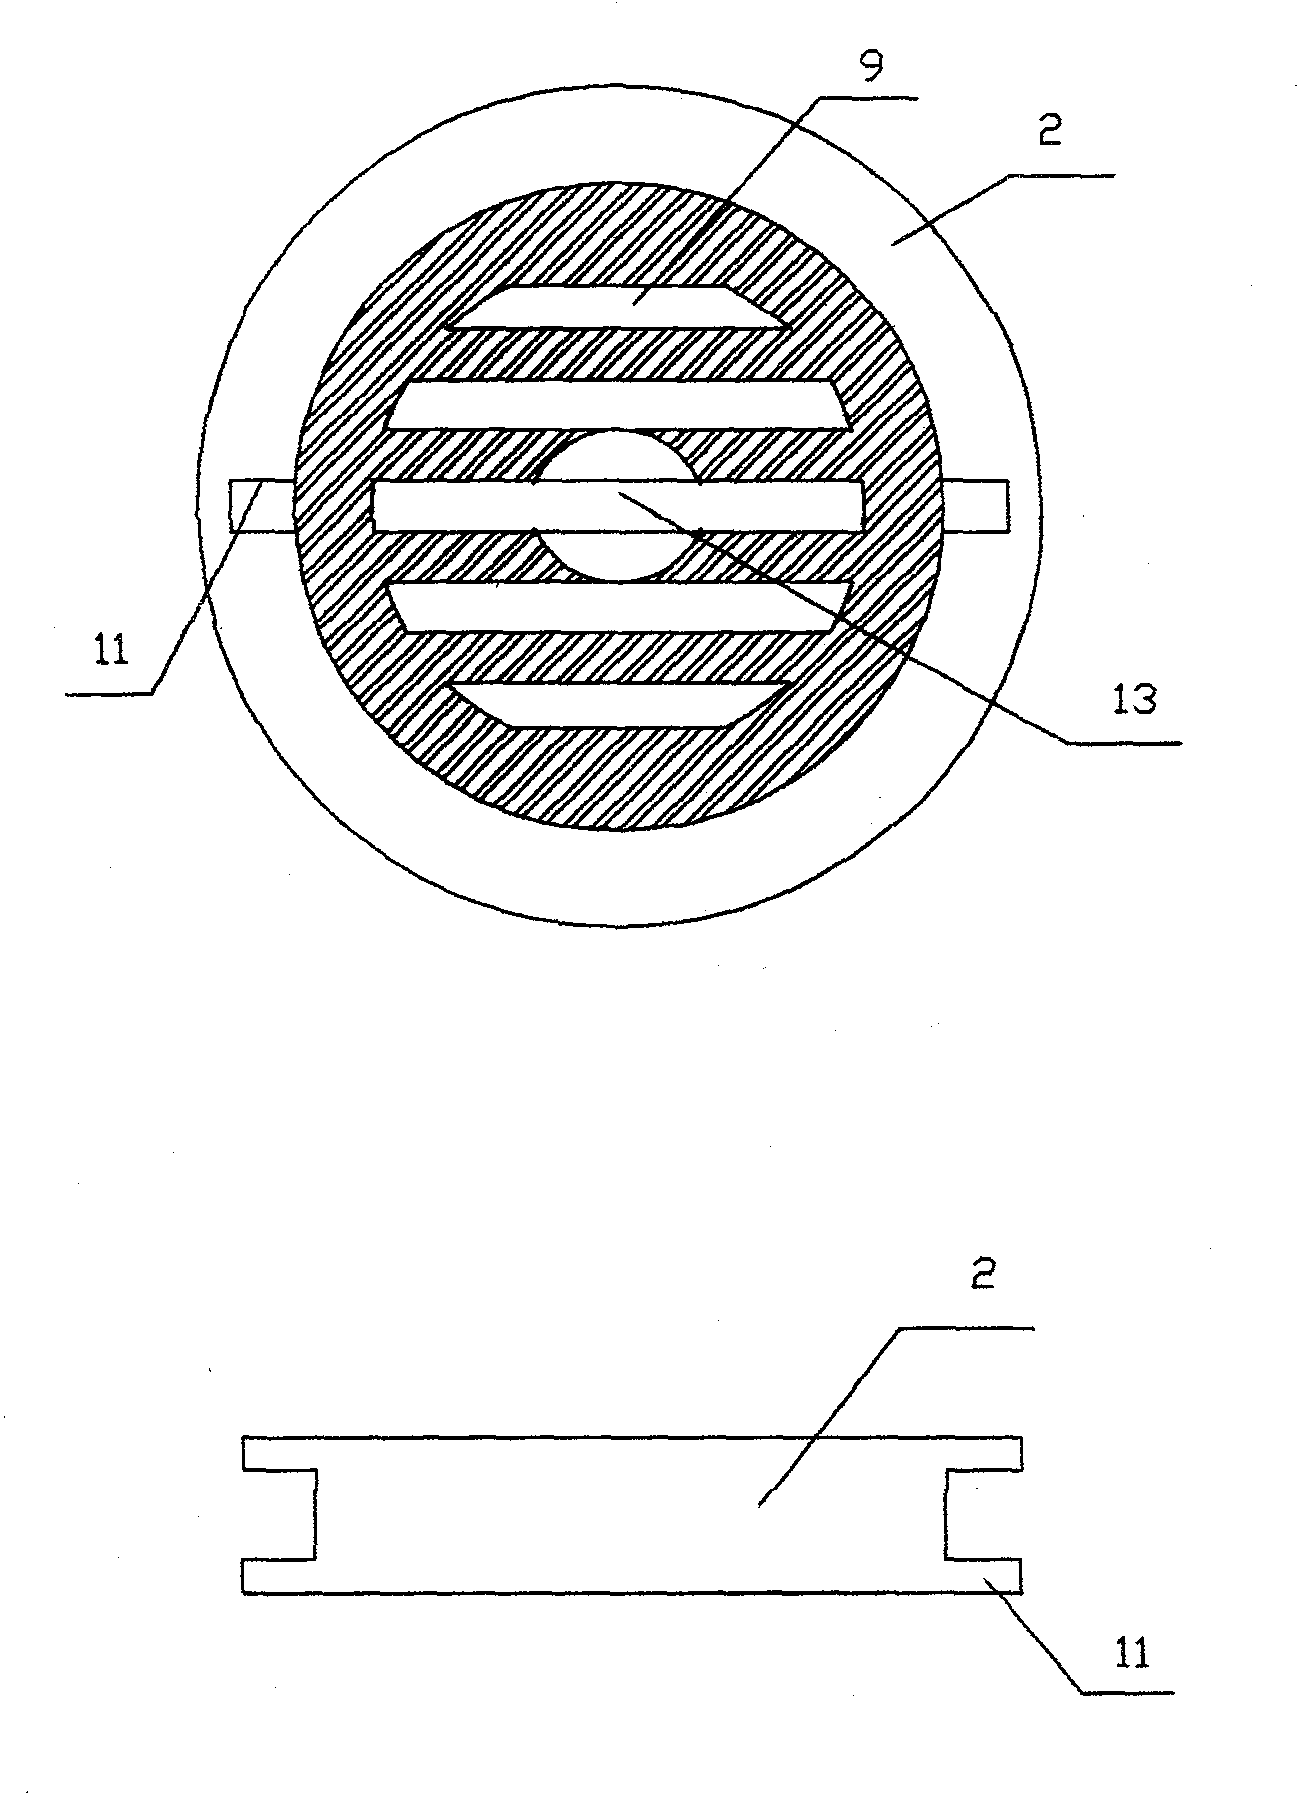 Floor drain with automatic blocking/drainage device